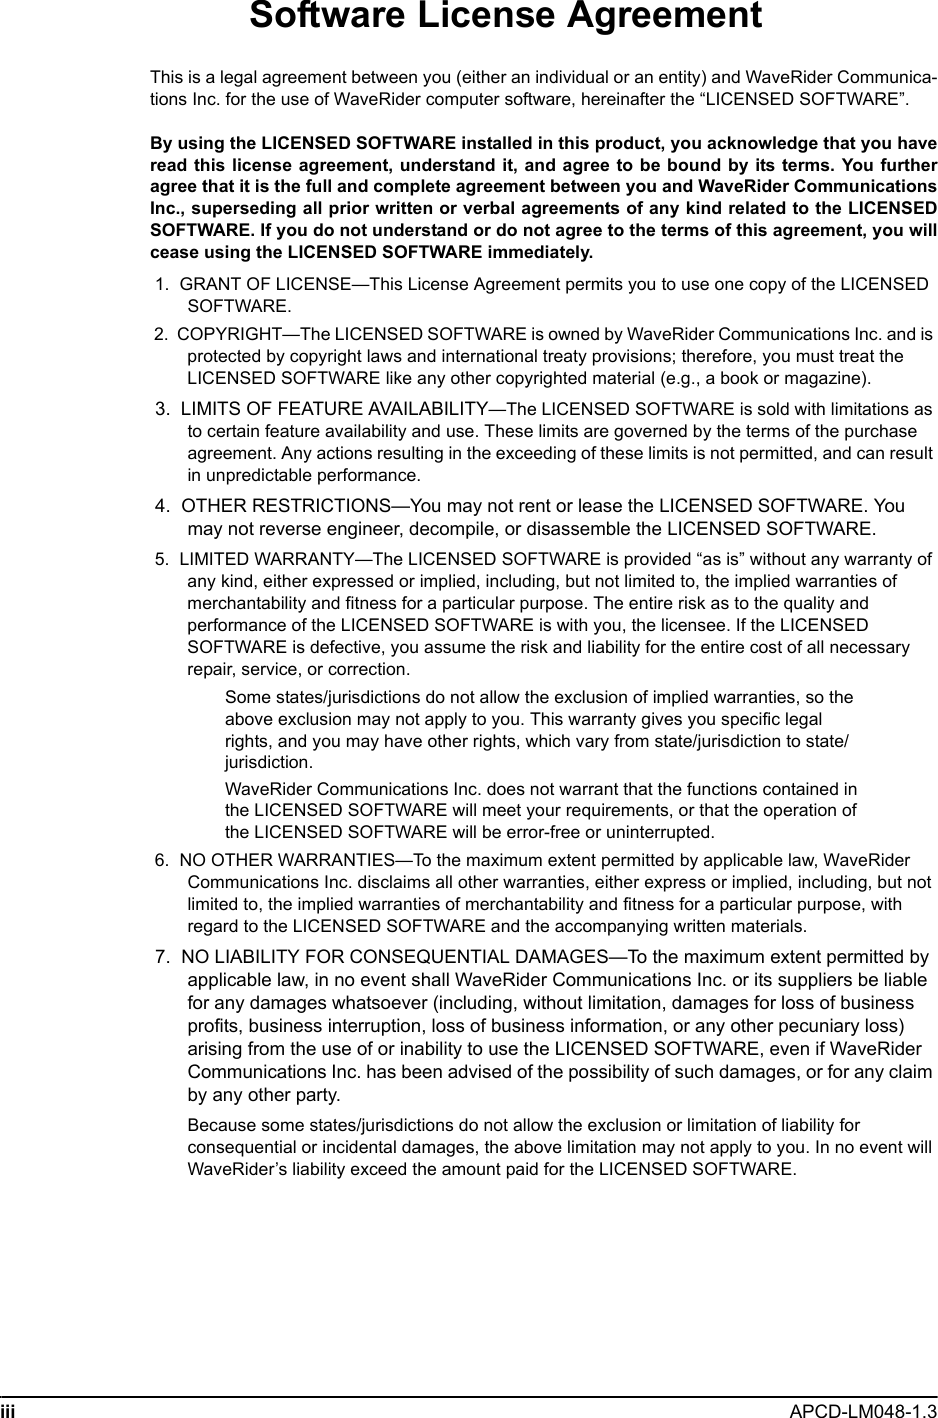 iii APCD-LM048-1.3 Software License AgreementThis is a legal agreement between you (either an individual or an entity) and WaveRider Communica-tions Inc. for the use of WaveRider computer software, hereinafter the “LICENSED SOFTWARE”.By using the LICENSED SOFTWARE installed in this product, you acknowledge that you haveread this license agreement, understand it, and agree to be bound by its terms. You furtheragree that it is the full and complete agreement between you and WaveRider CommunicationsInc., superseding all prior written or verbal agreements of any kind related to the LICENSEDSOFTWARE. If you do not understand or do not agree to the terms of this agreement, you willcease using the LICENSED SOFTWARE immediately. 1.  GRANT OF LICENSE—This License Agreement permits you to use one copy of the LICENSED SOFTWARE. 2.  COPYRIGHT—The LICENSED SOFTWARE is owned by WaveRider Communications Inc. and is protected by copyright laws and international treaty provisions; therefore, you must treat the LICENSED SOFTWARE like any other copyrighted material (e.g., a book or magazine).  3.  LIMITS OF FEATURE AVAILABILITY—The LICENSED SOFTWARE is sold with limitations as to certain feature availability and use. These limits are governed by the terms of the purchase agreement. Any actions resulting in the exceeding of these limits is not permitted, and can result in unpredictable performance. 4.  OTHER RESTRICTIONS—You may not rent or lease the LICENSED SOFTWARE. You may not reverse engineer, decompile, or disassemble the LICENSED SOFTWARE. 5.  LIMITED WARRANTY—The LICENSED SOFTWARE is provided “as is” without any warranty of any kind, either expressed or implied, including, but not limited to, the implied warranties of merchantability and fitness for a particular purpose. The entire risk as to the quality and performance of the LICENSED SOFTWARE is with you, the licensee. If the LICENSED SOFTWARE is defective, you assume the risk and liability for the entire cost of all necessary repair, service, or correction.Some states/jurisdictions do not allow the exclusion of implied warranties, so the above exclusion may not apply to you. This warranty gives you specific legal rights, and you may have other rights, which vary from state/jurisdiction to state/jurisdiction.WaveRider Communications Inc. does not warrant that the functions contained in the LICENSED SOFTWARE will meet your requirements, or that the operation of the LICENSED SOFTWARE will be error-free or uninterrupted. 6.  NO OTHER WARRANTIES—To the maximum extent permitted by applicable law, WaveRider Communications Inc. disclaims all other warranties, either express or implied, including, but not limited to, the implied warranties of merchantability and fitness for a particular purpose, with regard to the LICENSED SOFTWARE and the accompanying written materials. 7.  NO LIABILITY FOR CONSEQUENTIAL DAMAGES—To the maximum extent permitted by applicable law, in no event shall WaveRider Communications Inc. or its suppliers be liable for any damages whatsoever (including, without limitation, damages for loss of business profits, business interruption, loss of business information, or any other pecuniary loss) arising from the use of or inability to use the LICENSED SOFTWARE, even if WaveRider Communications Inc. has been advised of the possibility of such damages, or for any claim by any other party.Because some states/jurisdictions do not allow the exclusion or limitation of liability for consequential or incidental damages, the above limitation may not apply to you. In no event will WaveRider’s liability exceed the amount paid for the LICENSED SOFTWARE.